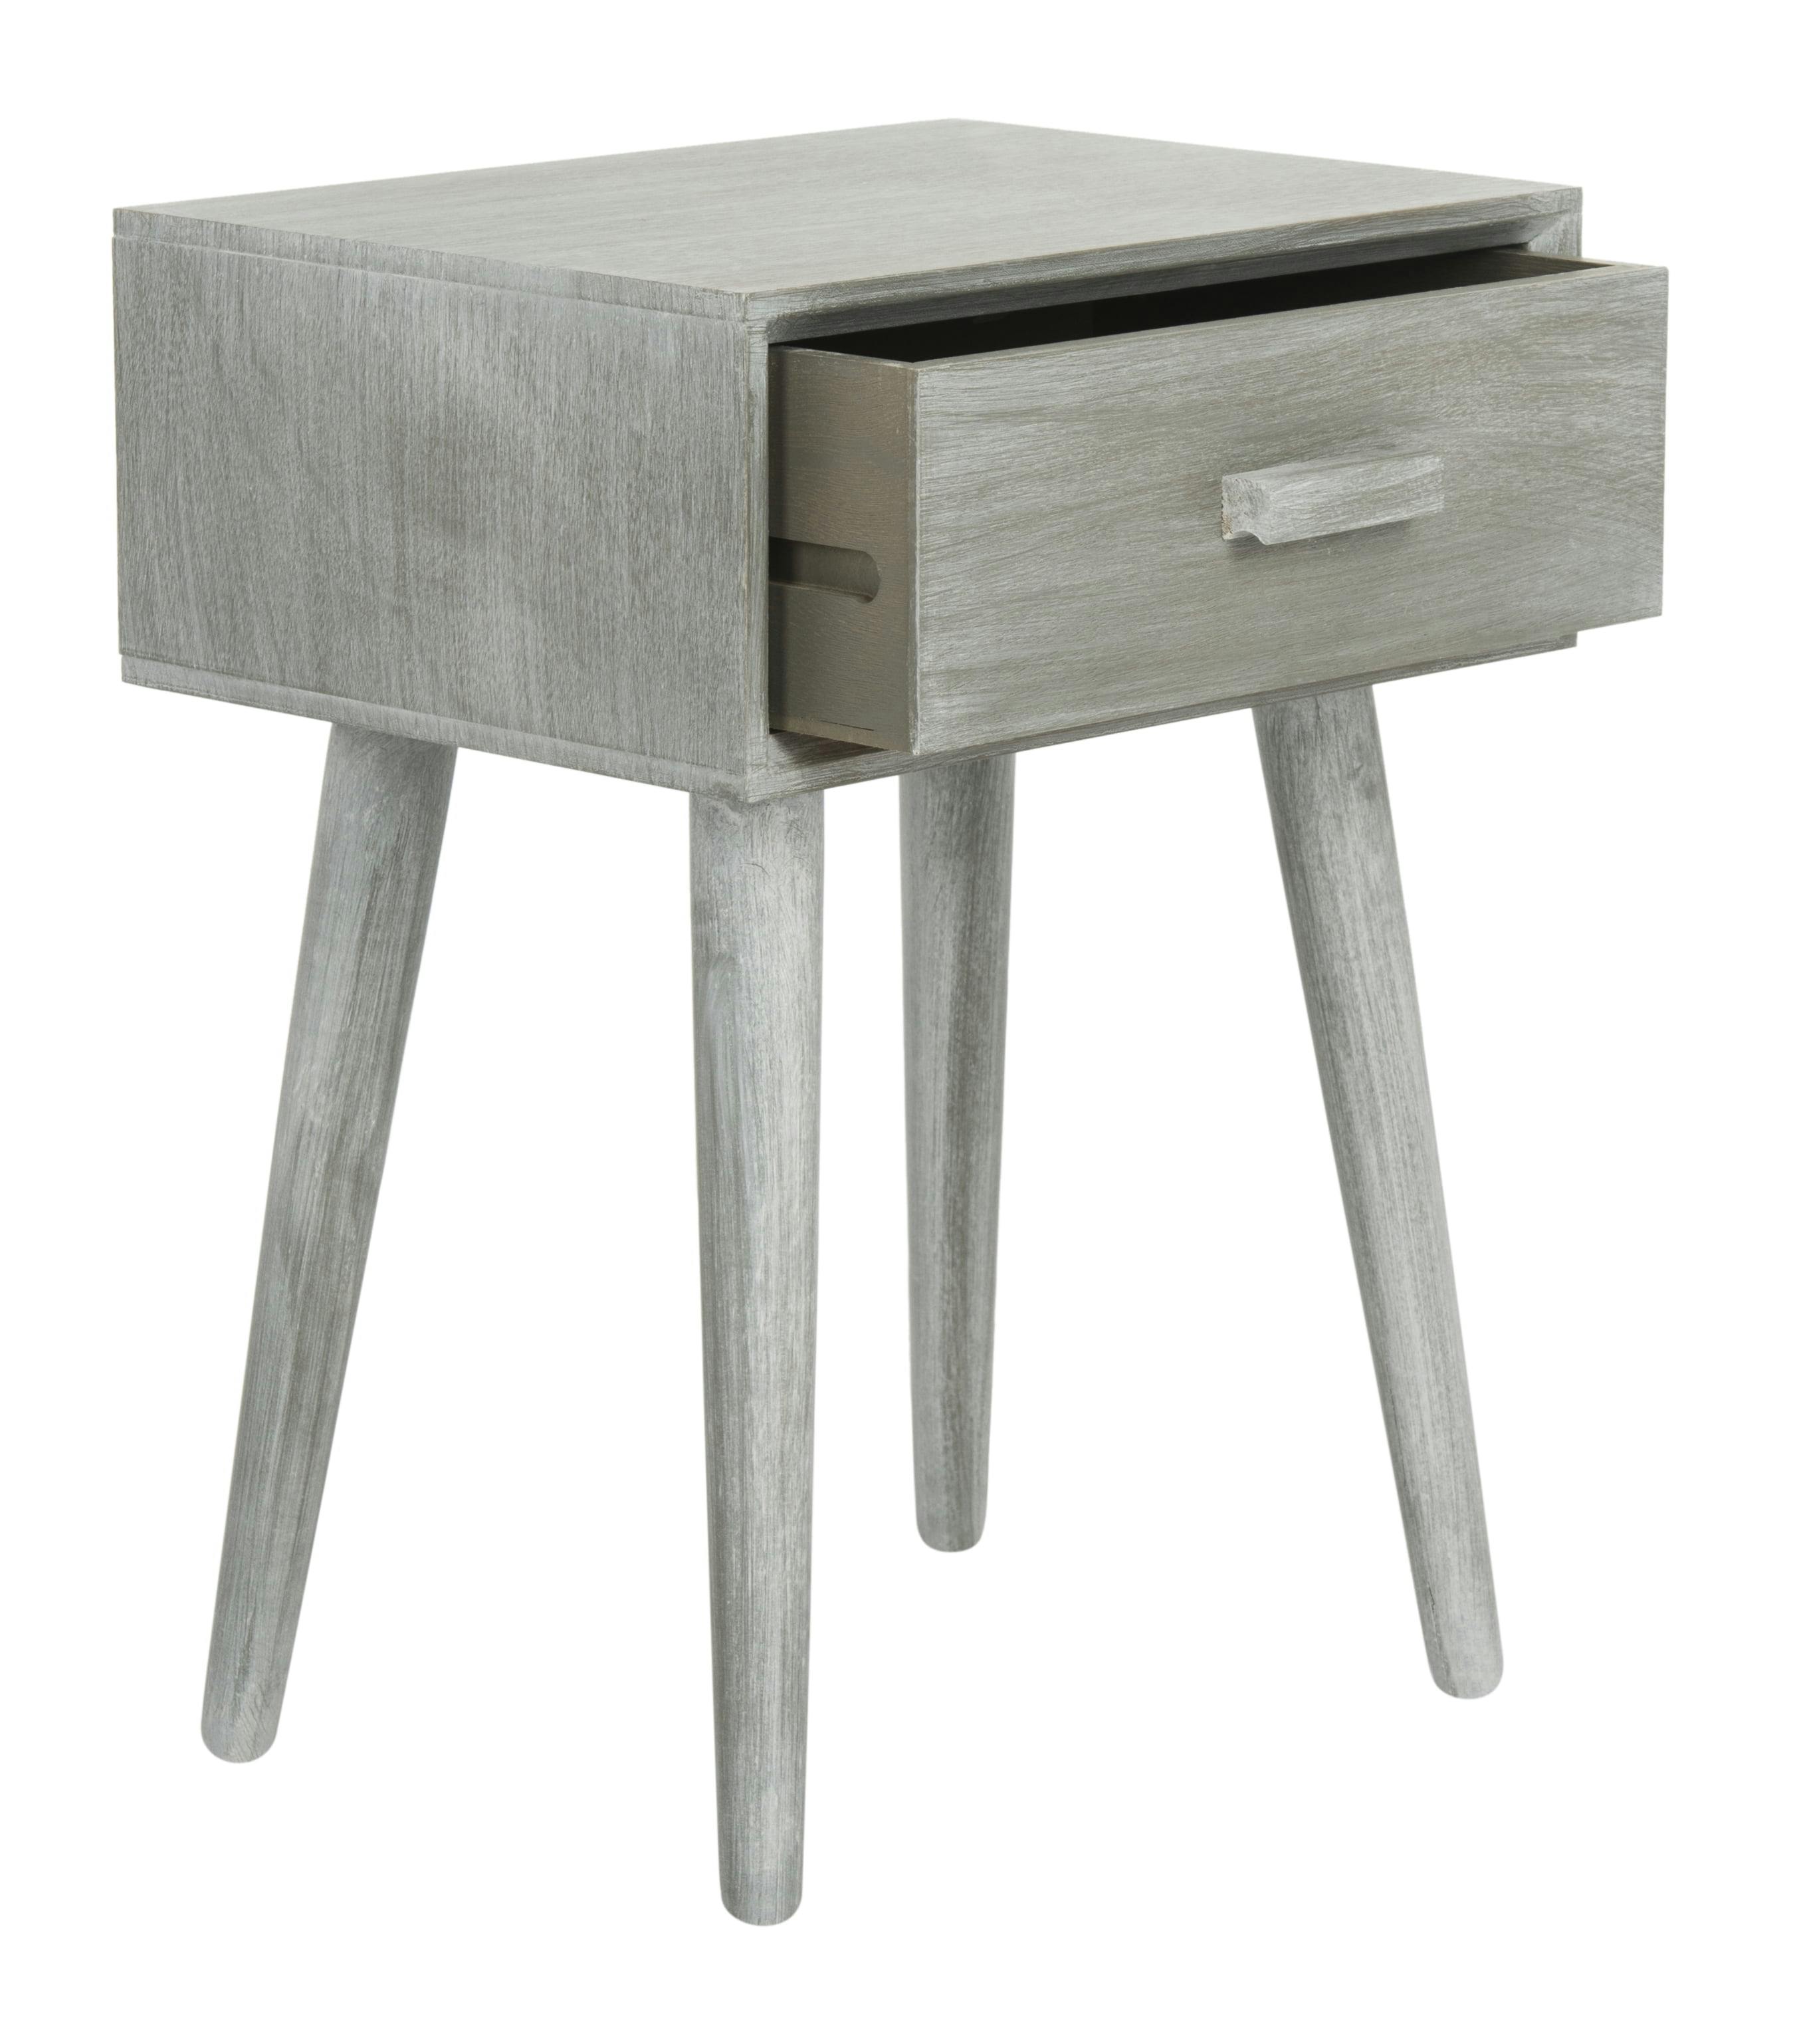 Transitional Slate Grey Rectangular Pine Wood Side Table with Storage